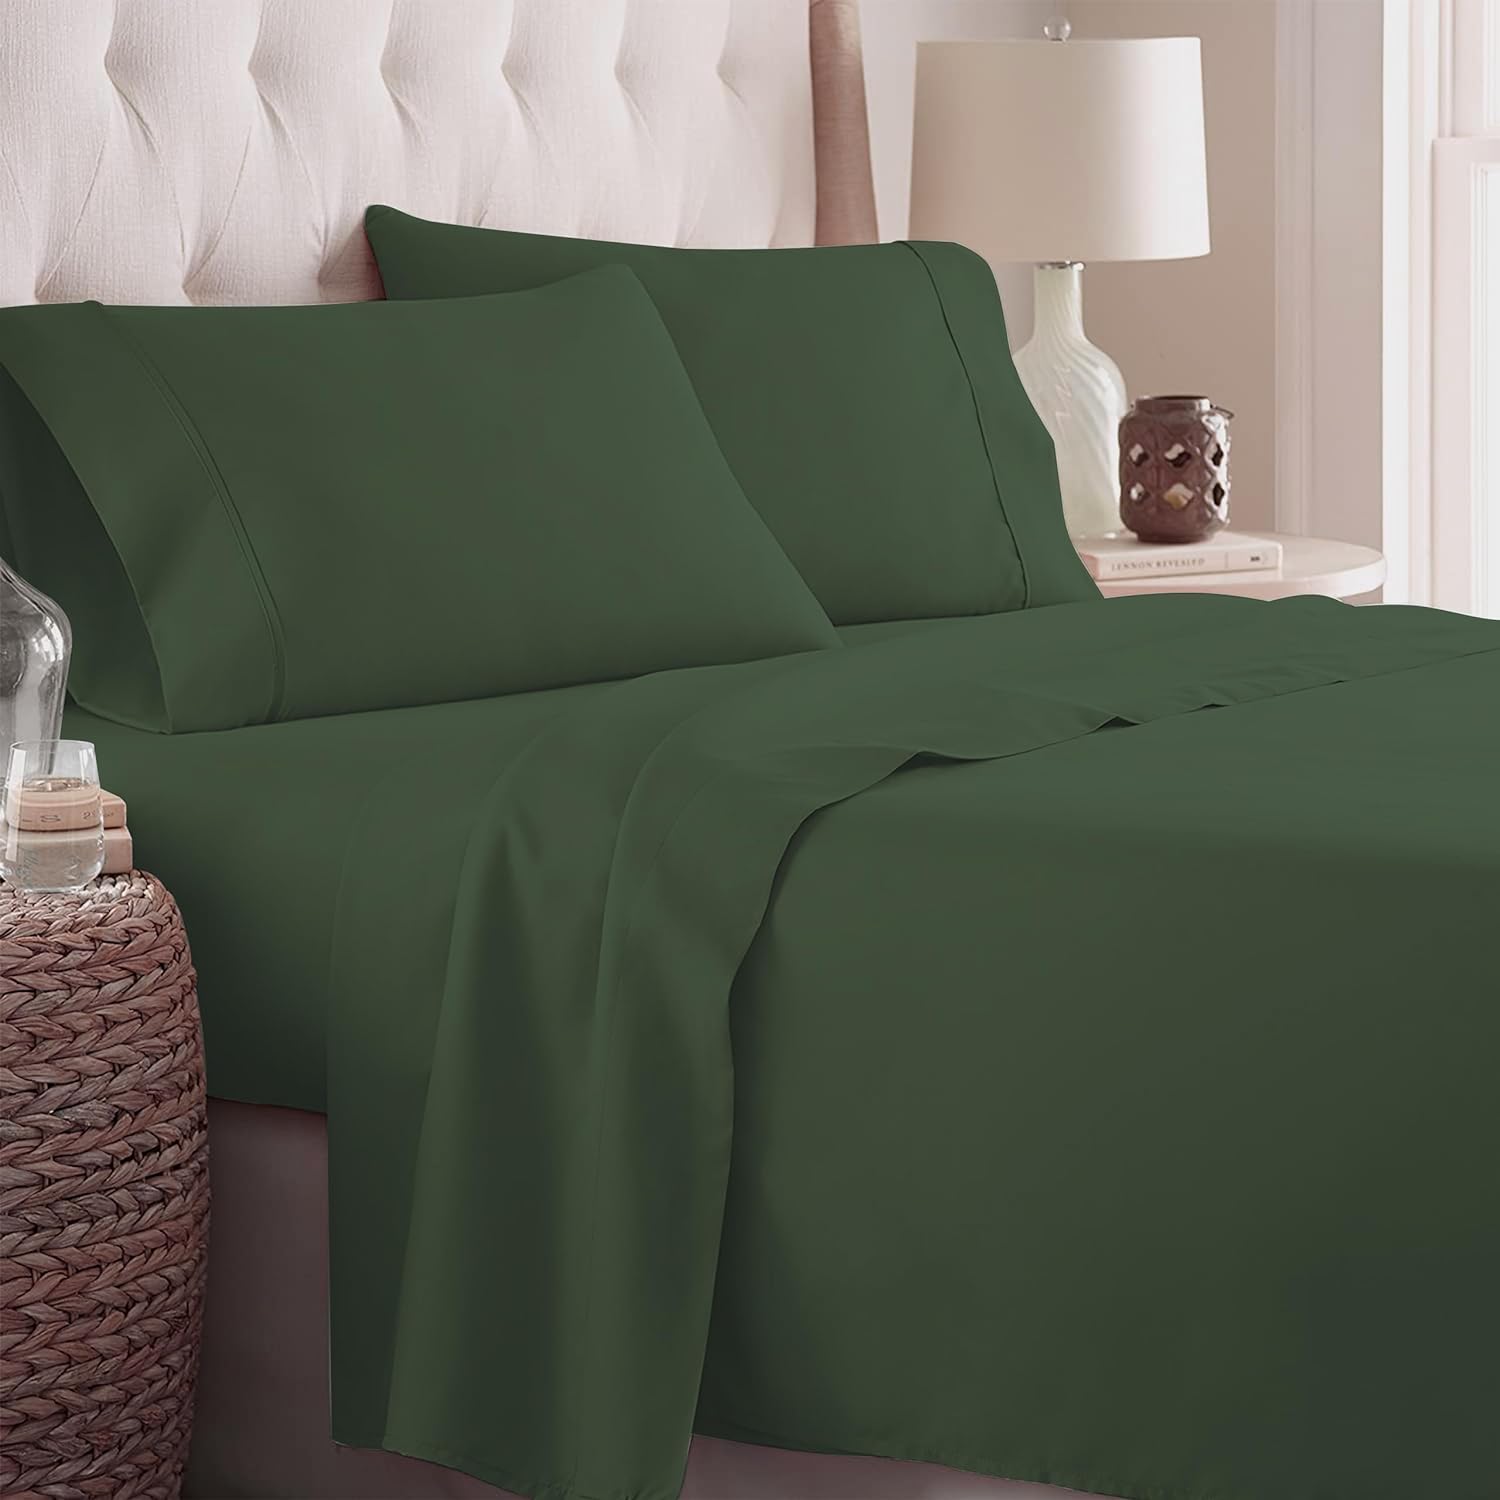 I ordered this sheet set as an extra to have on hand, after spending approximately $200.00 on a single set of sheets from MYSHEETSROCK.COM. I really liked my $200.00 sheets and thought they were the best investment Id made for myself in a long time. I was shocked when I started using this sheet set! They are a fraction of the cost, they fit my King size mattress much better than the aforementioned set, they are much more sturdy and comfortable to boot! Not to mention, this set includes 4 King